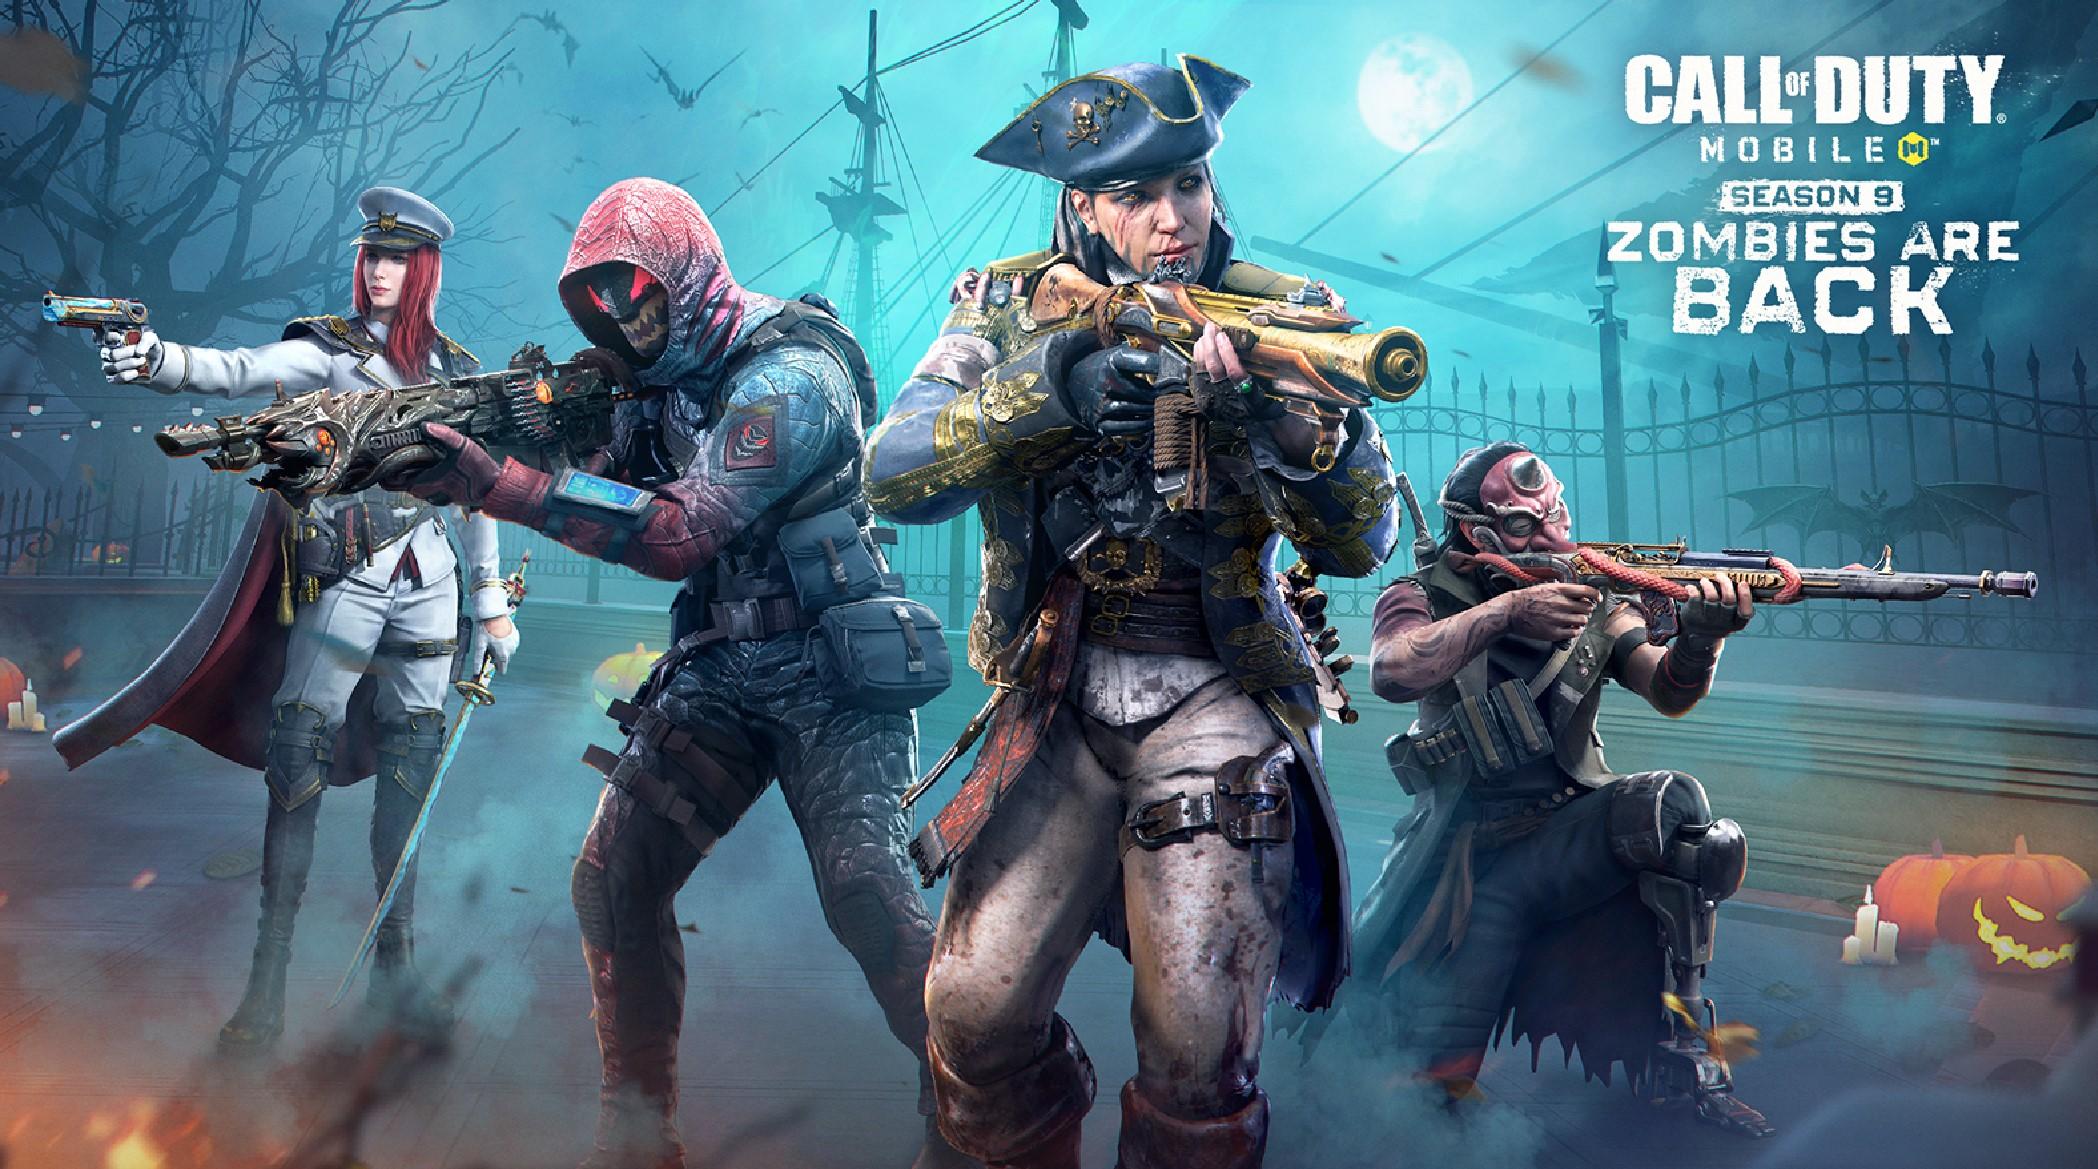 Anarchy Reigns in Call of Duty: Mobile Season 5 — Get Wrecked!